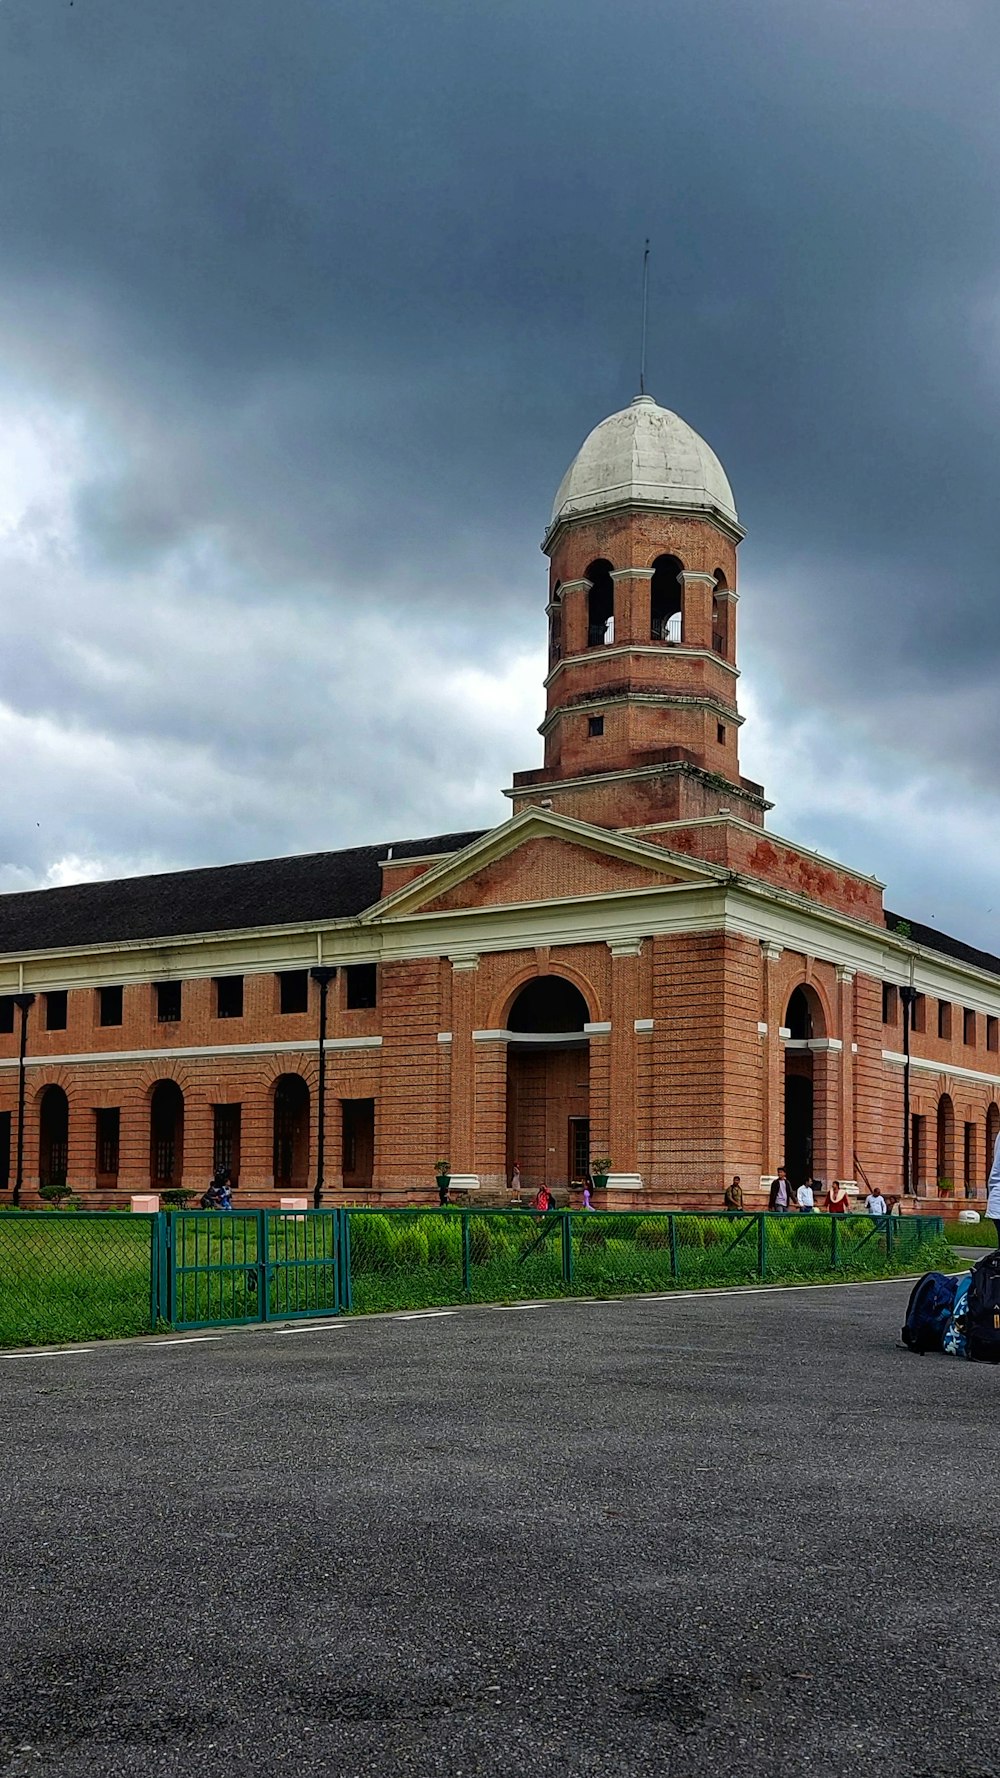 a large brick building with a domed roof